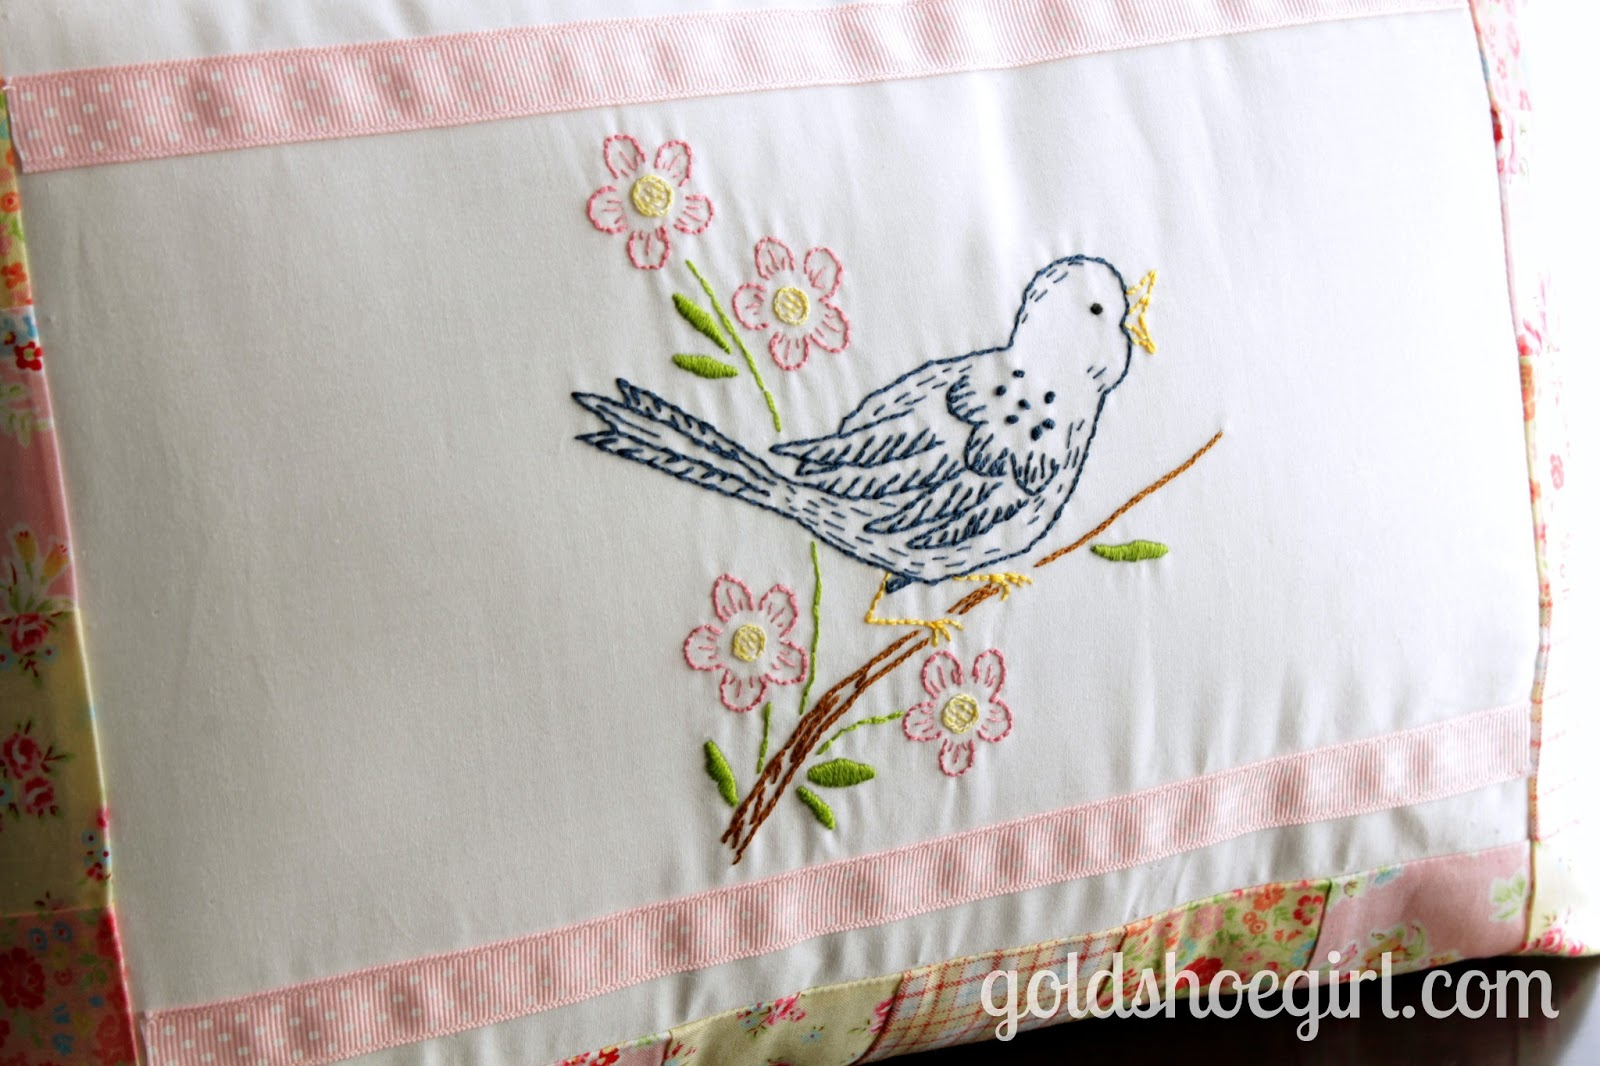 Hand Embroidery Patterns For Pillowcases Pillow Cover Embroidery Designs Decorticosis